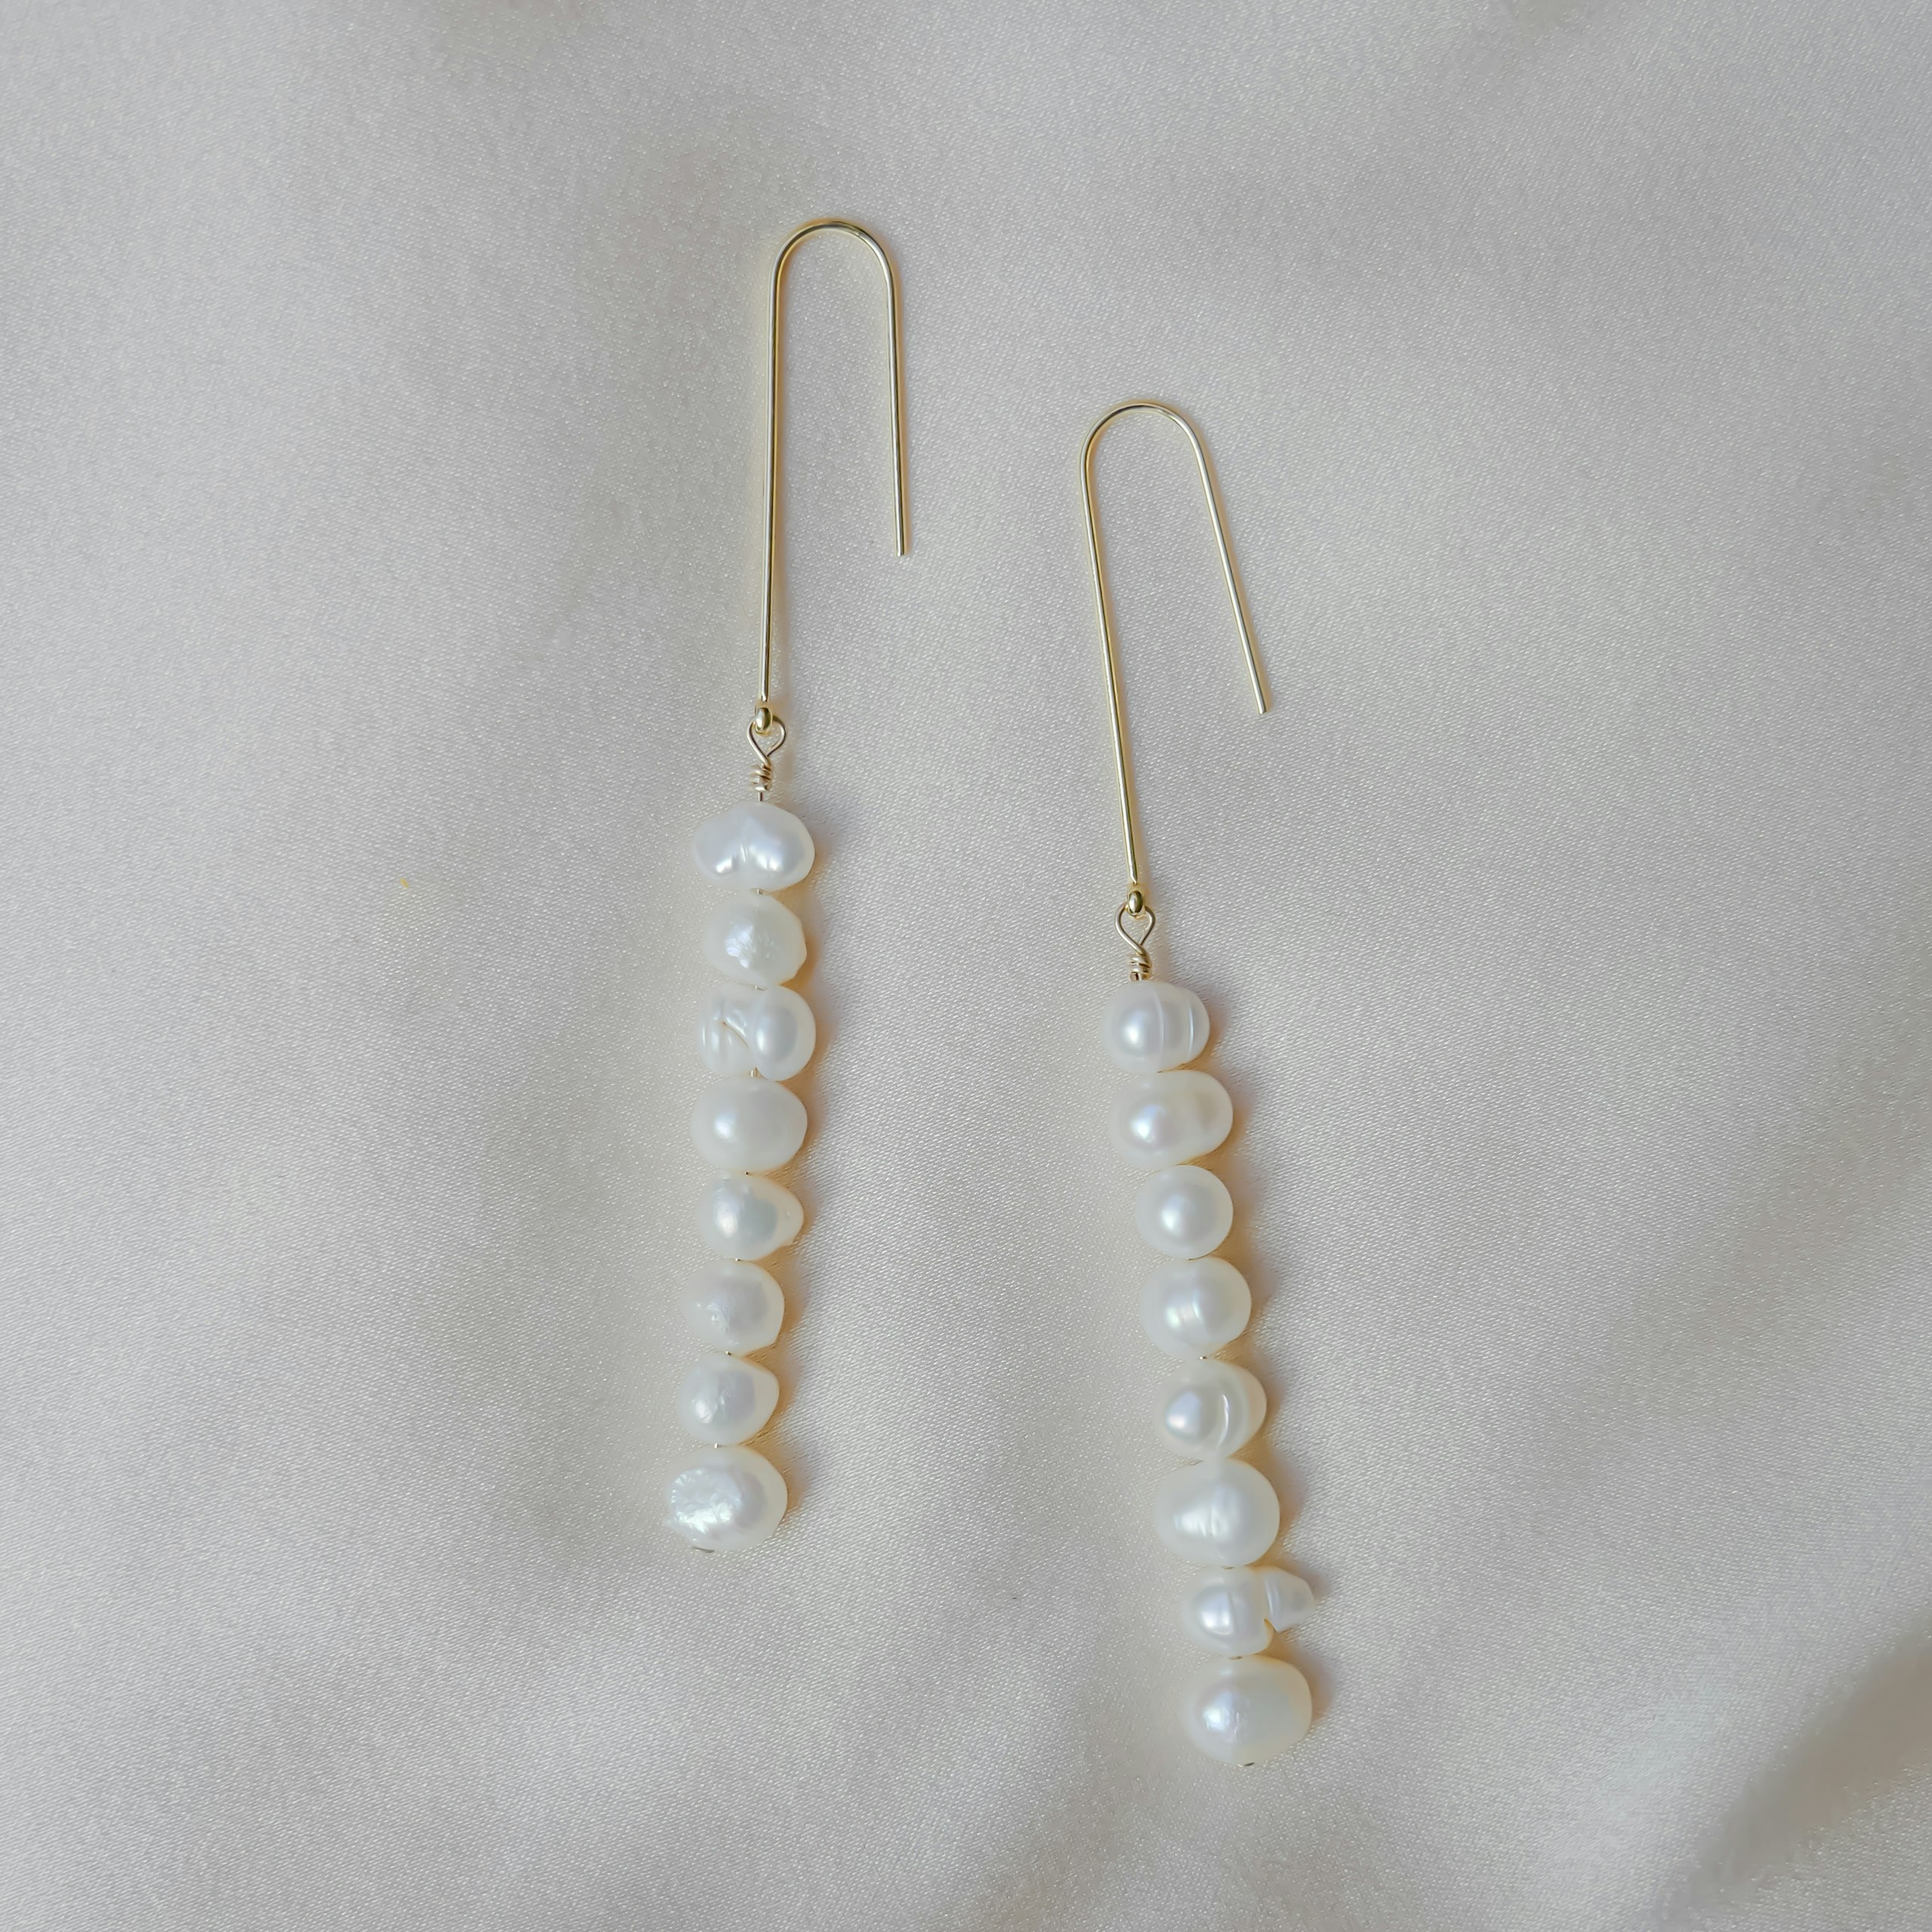 Show Off Your Earrings: Tips